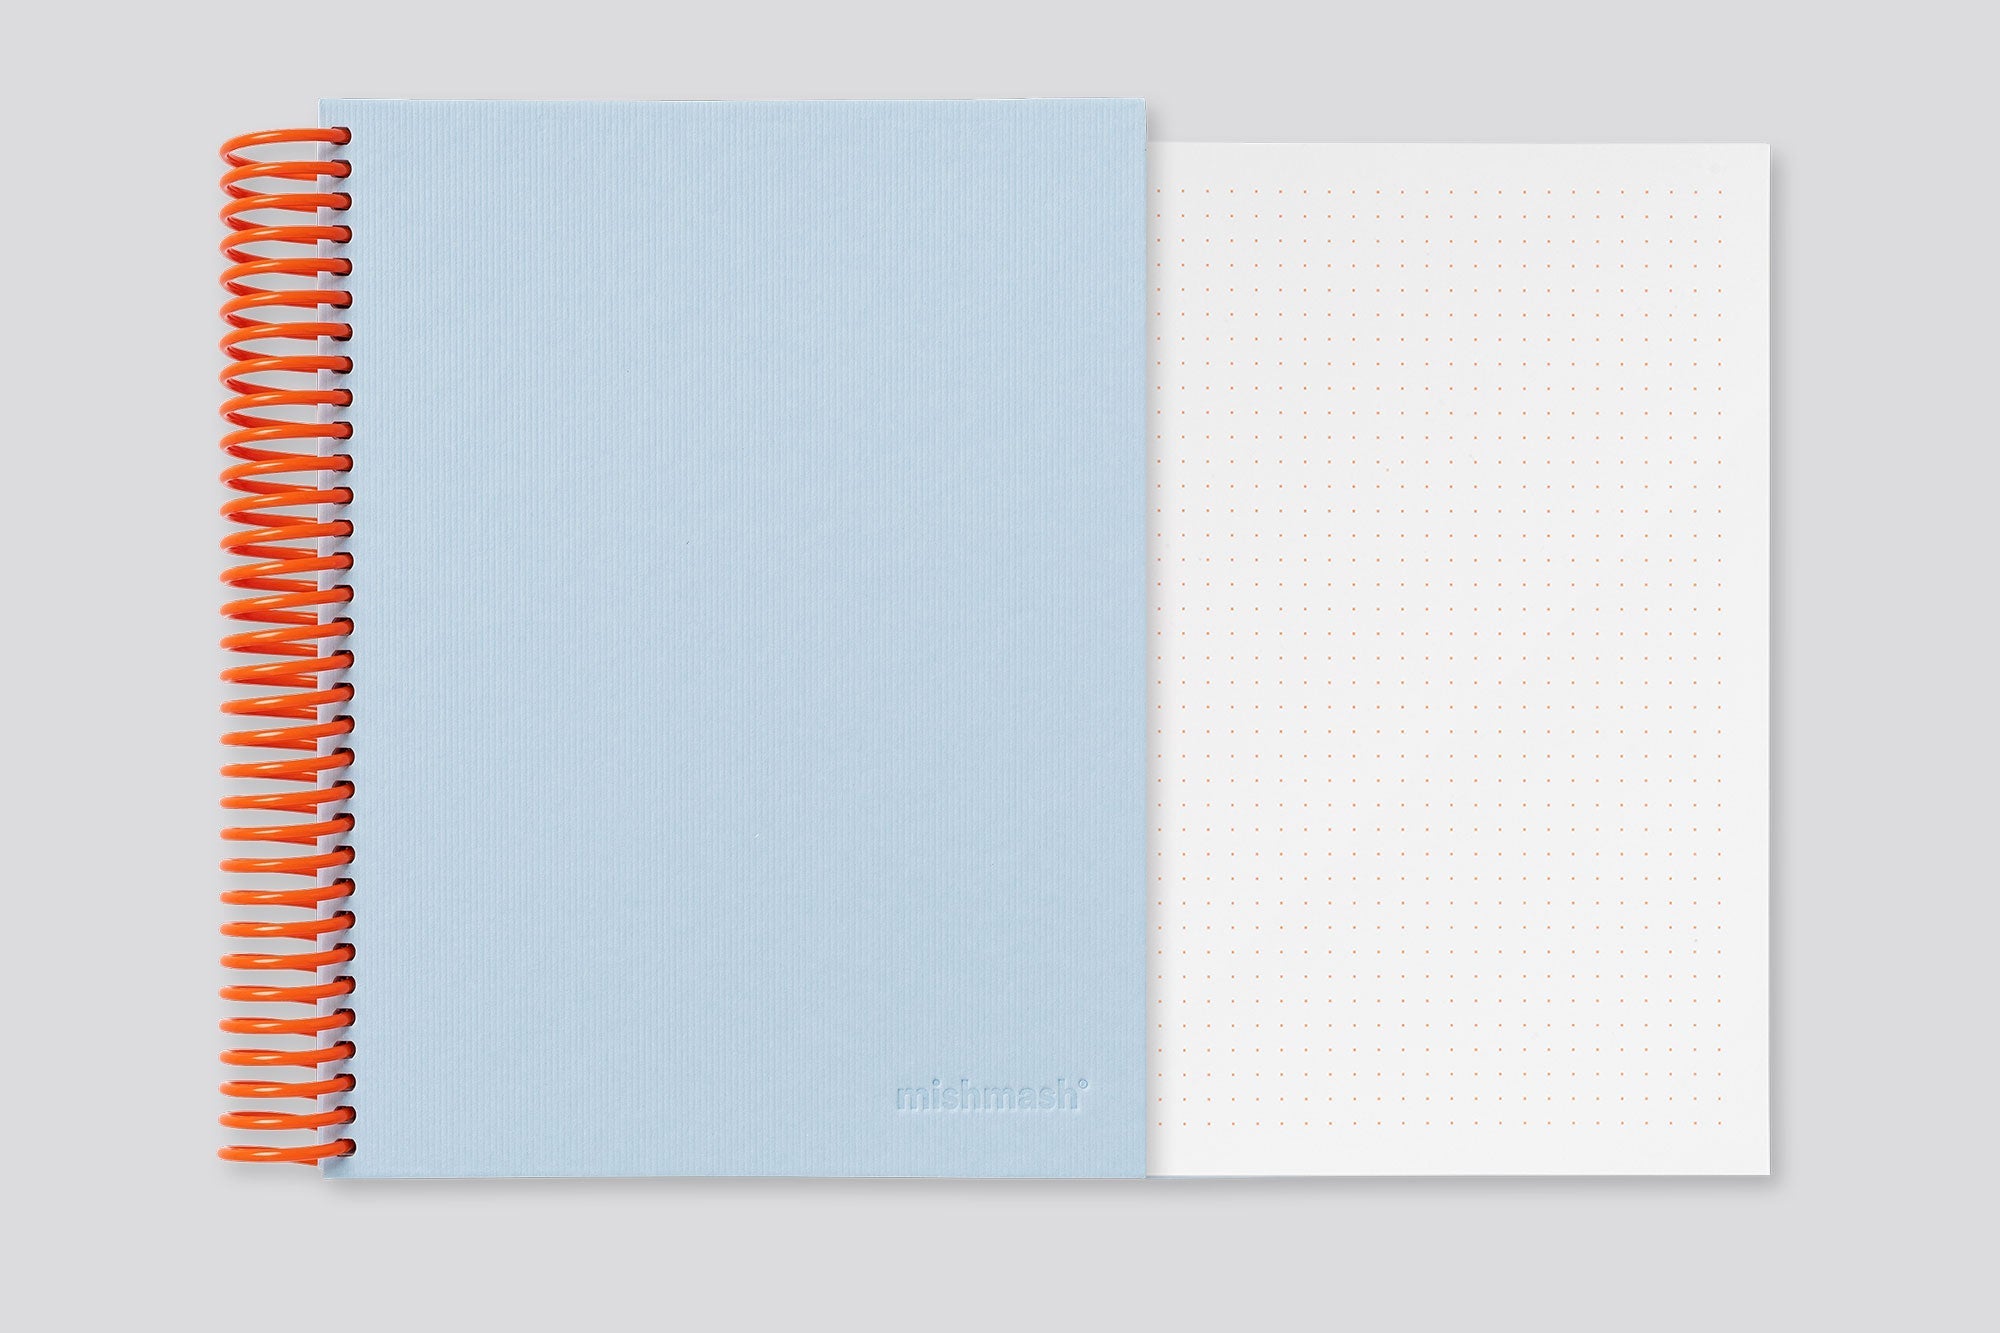 Mishmash - Easy Breezy Coil Notebook (Azure) - Dotted-Notebook-DutchMills